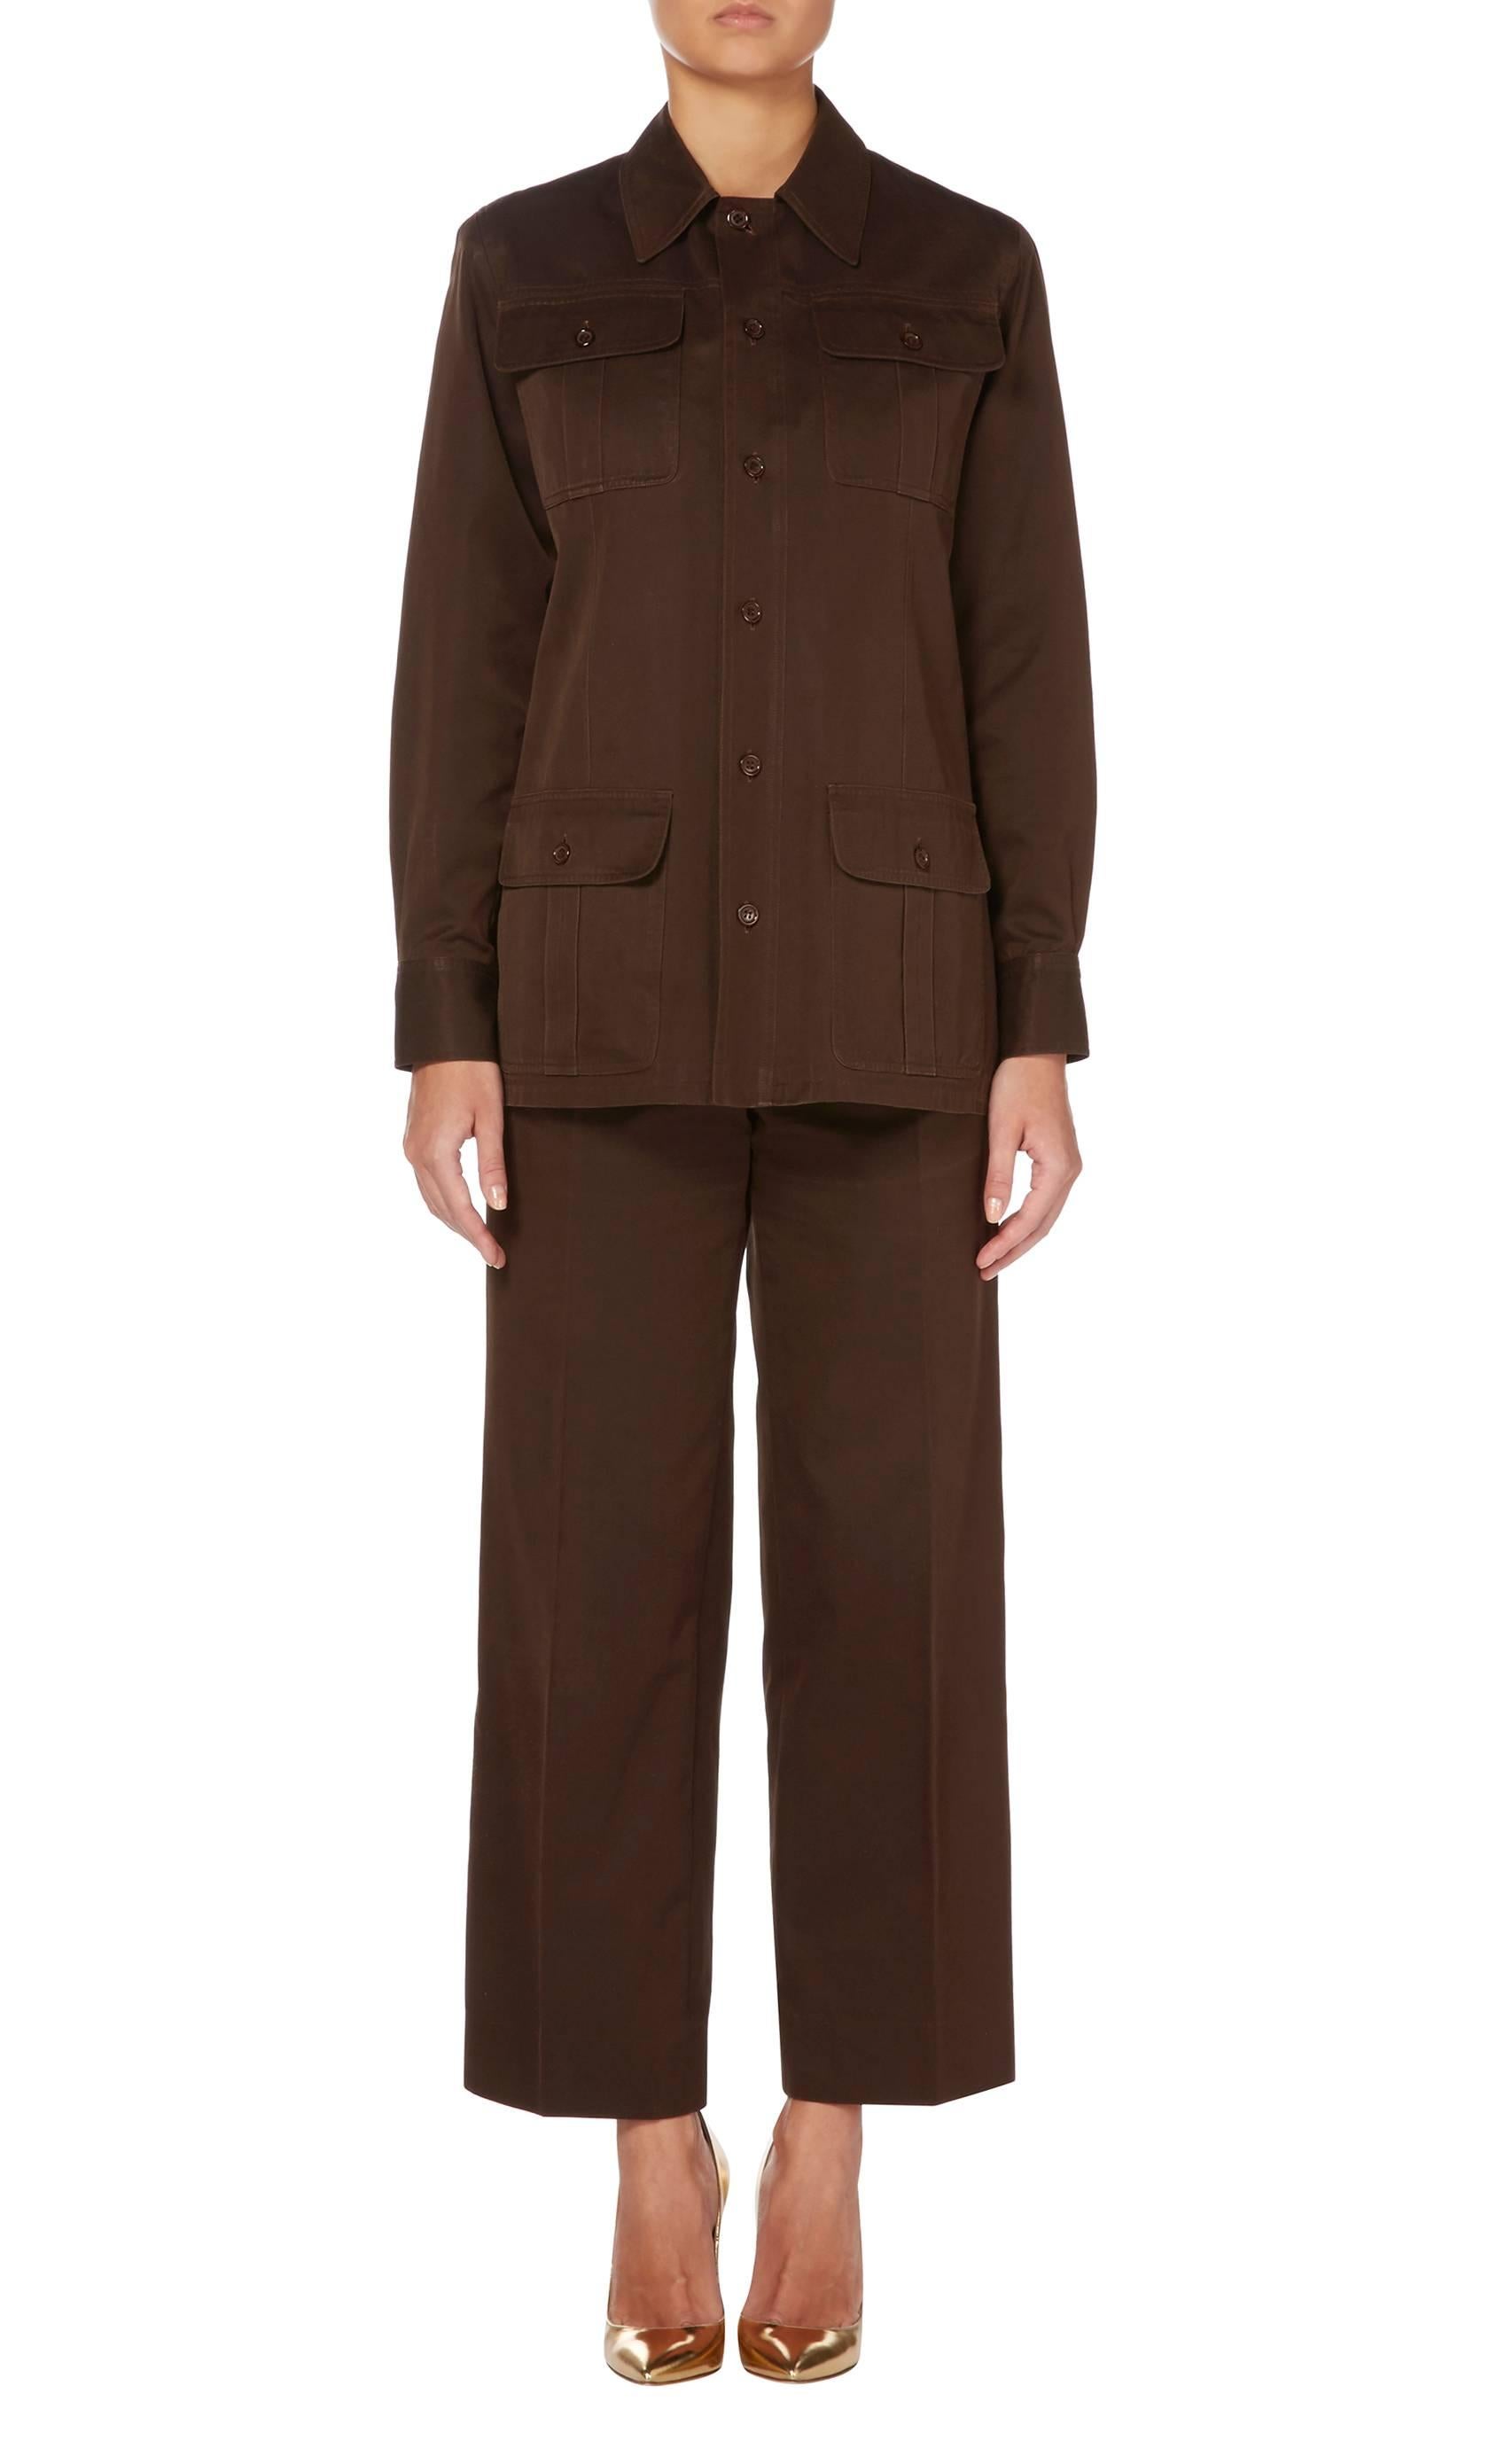 A fantastic example of the safari inspired designs that Yves Saint Laurent first debuted in 1968, this trouser suit is constructed in utilitarian style brown cotton. The long sleeved shirt features bellow pockets on the bust and hips, while the